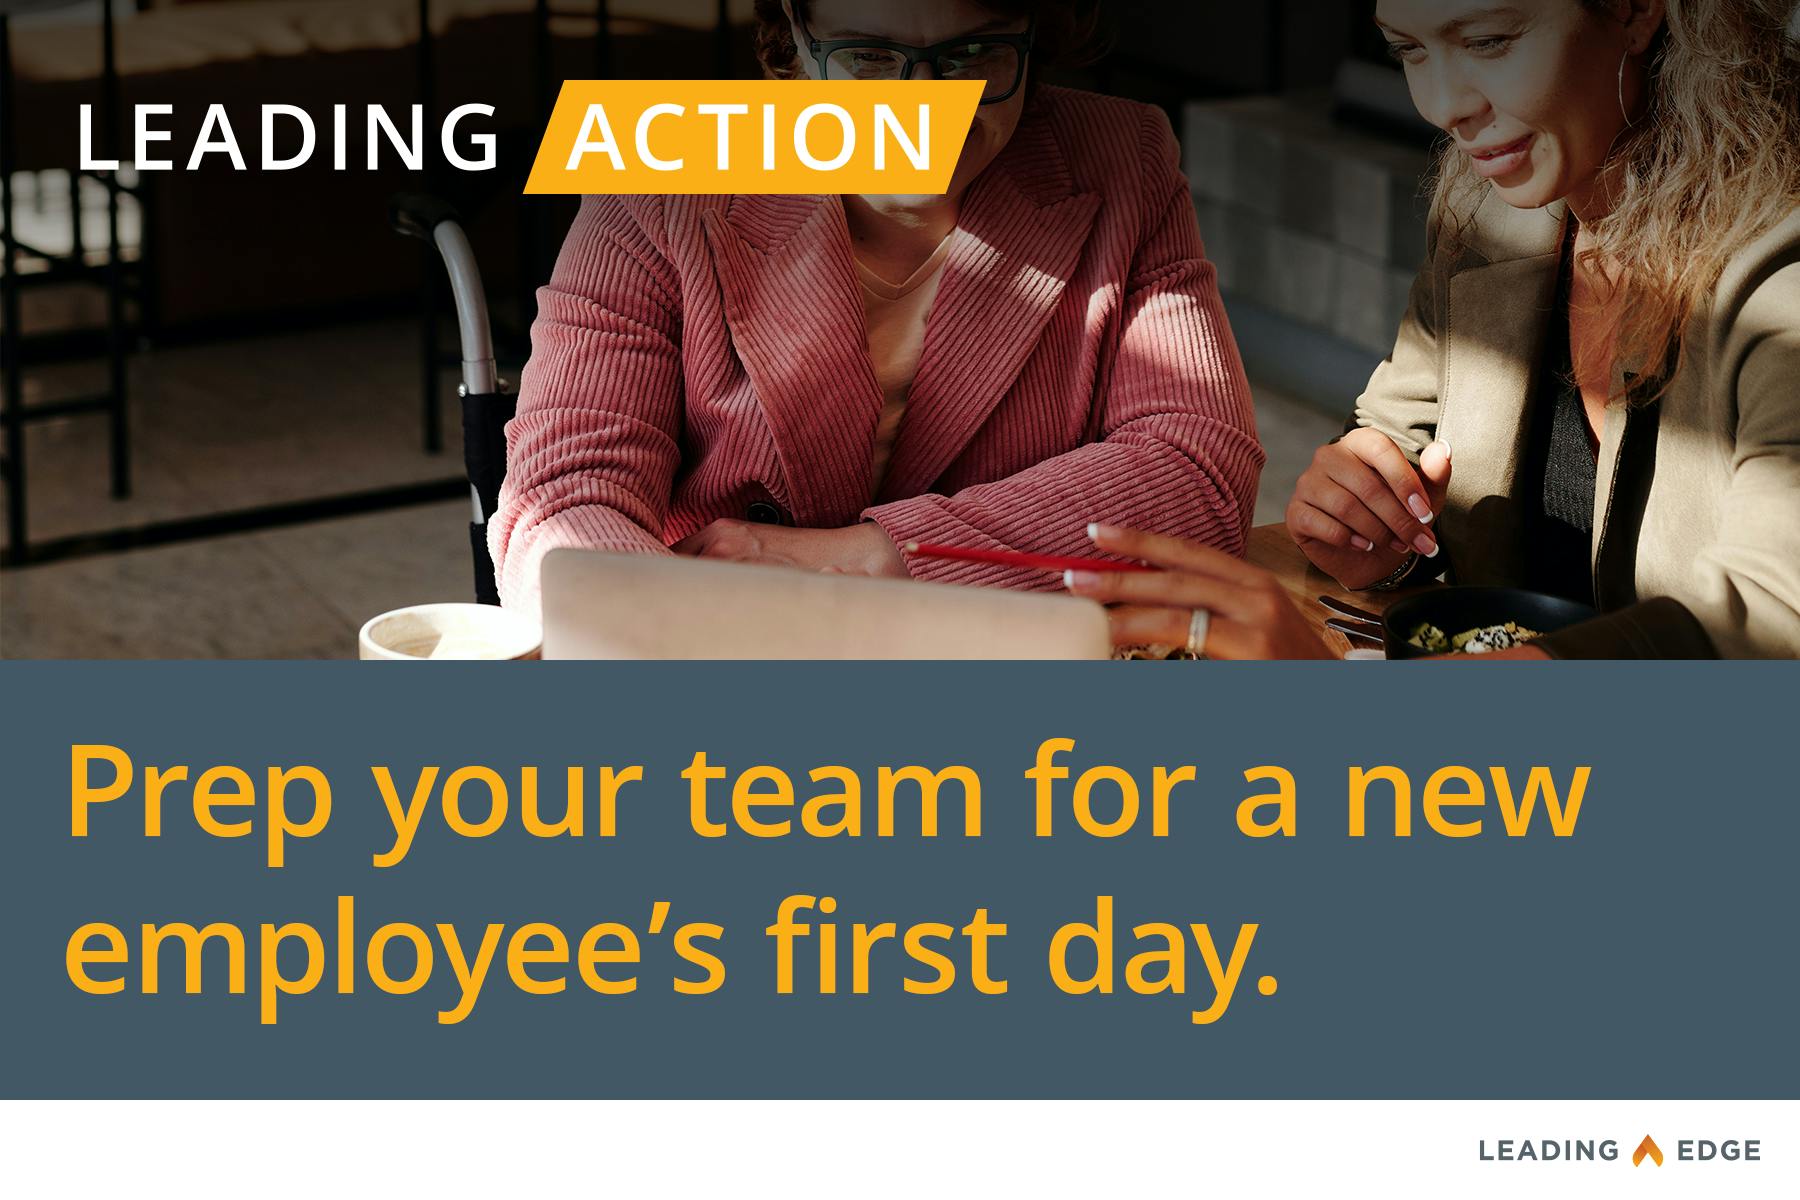 Leading Action: Prep your team for a new employee's first day.